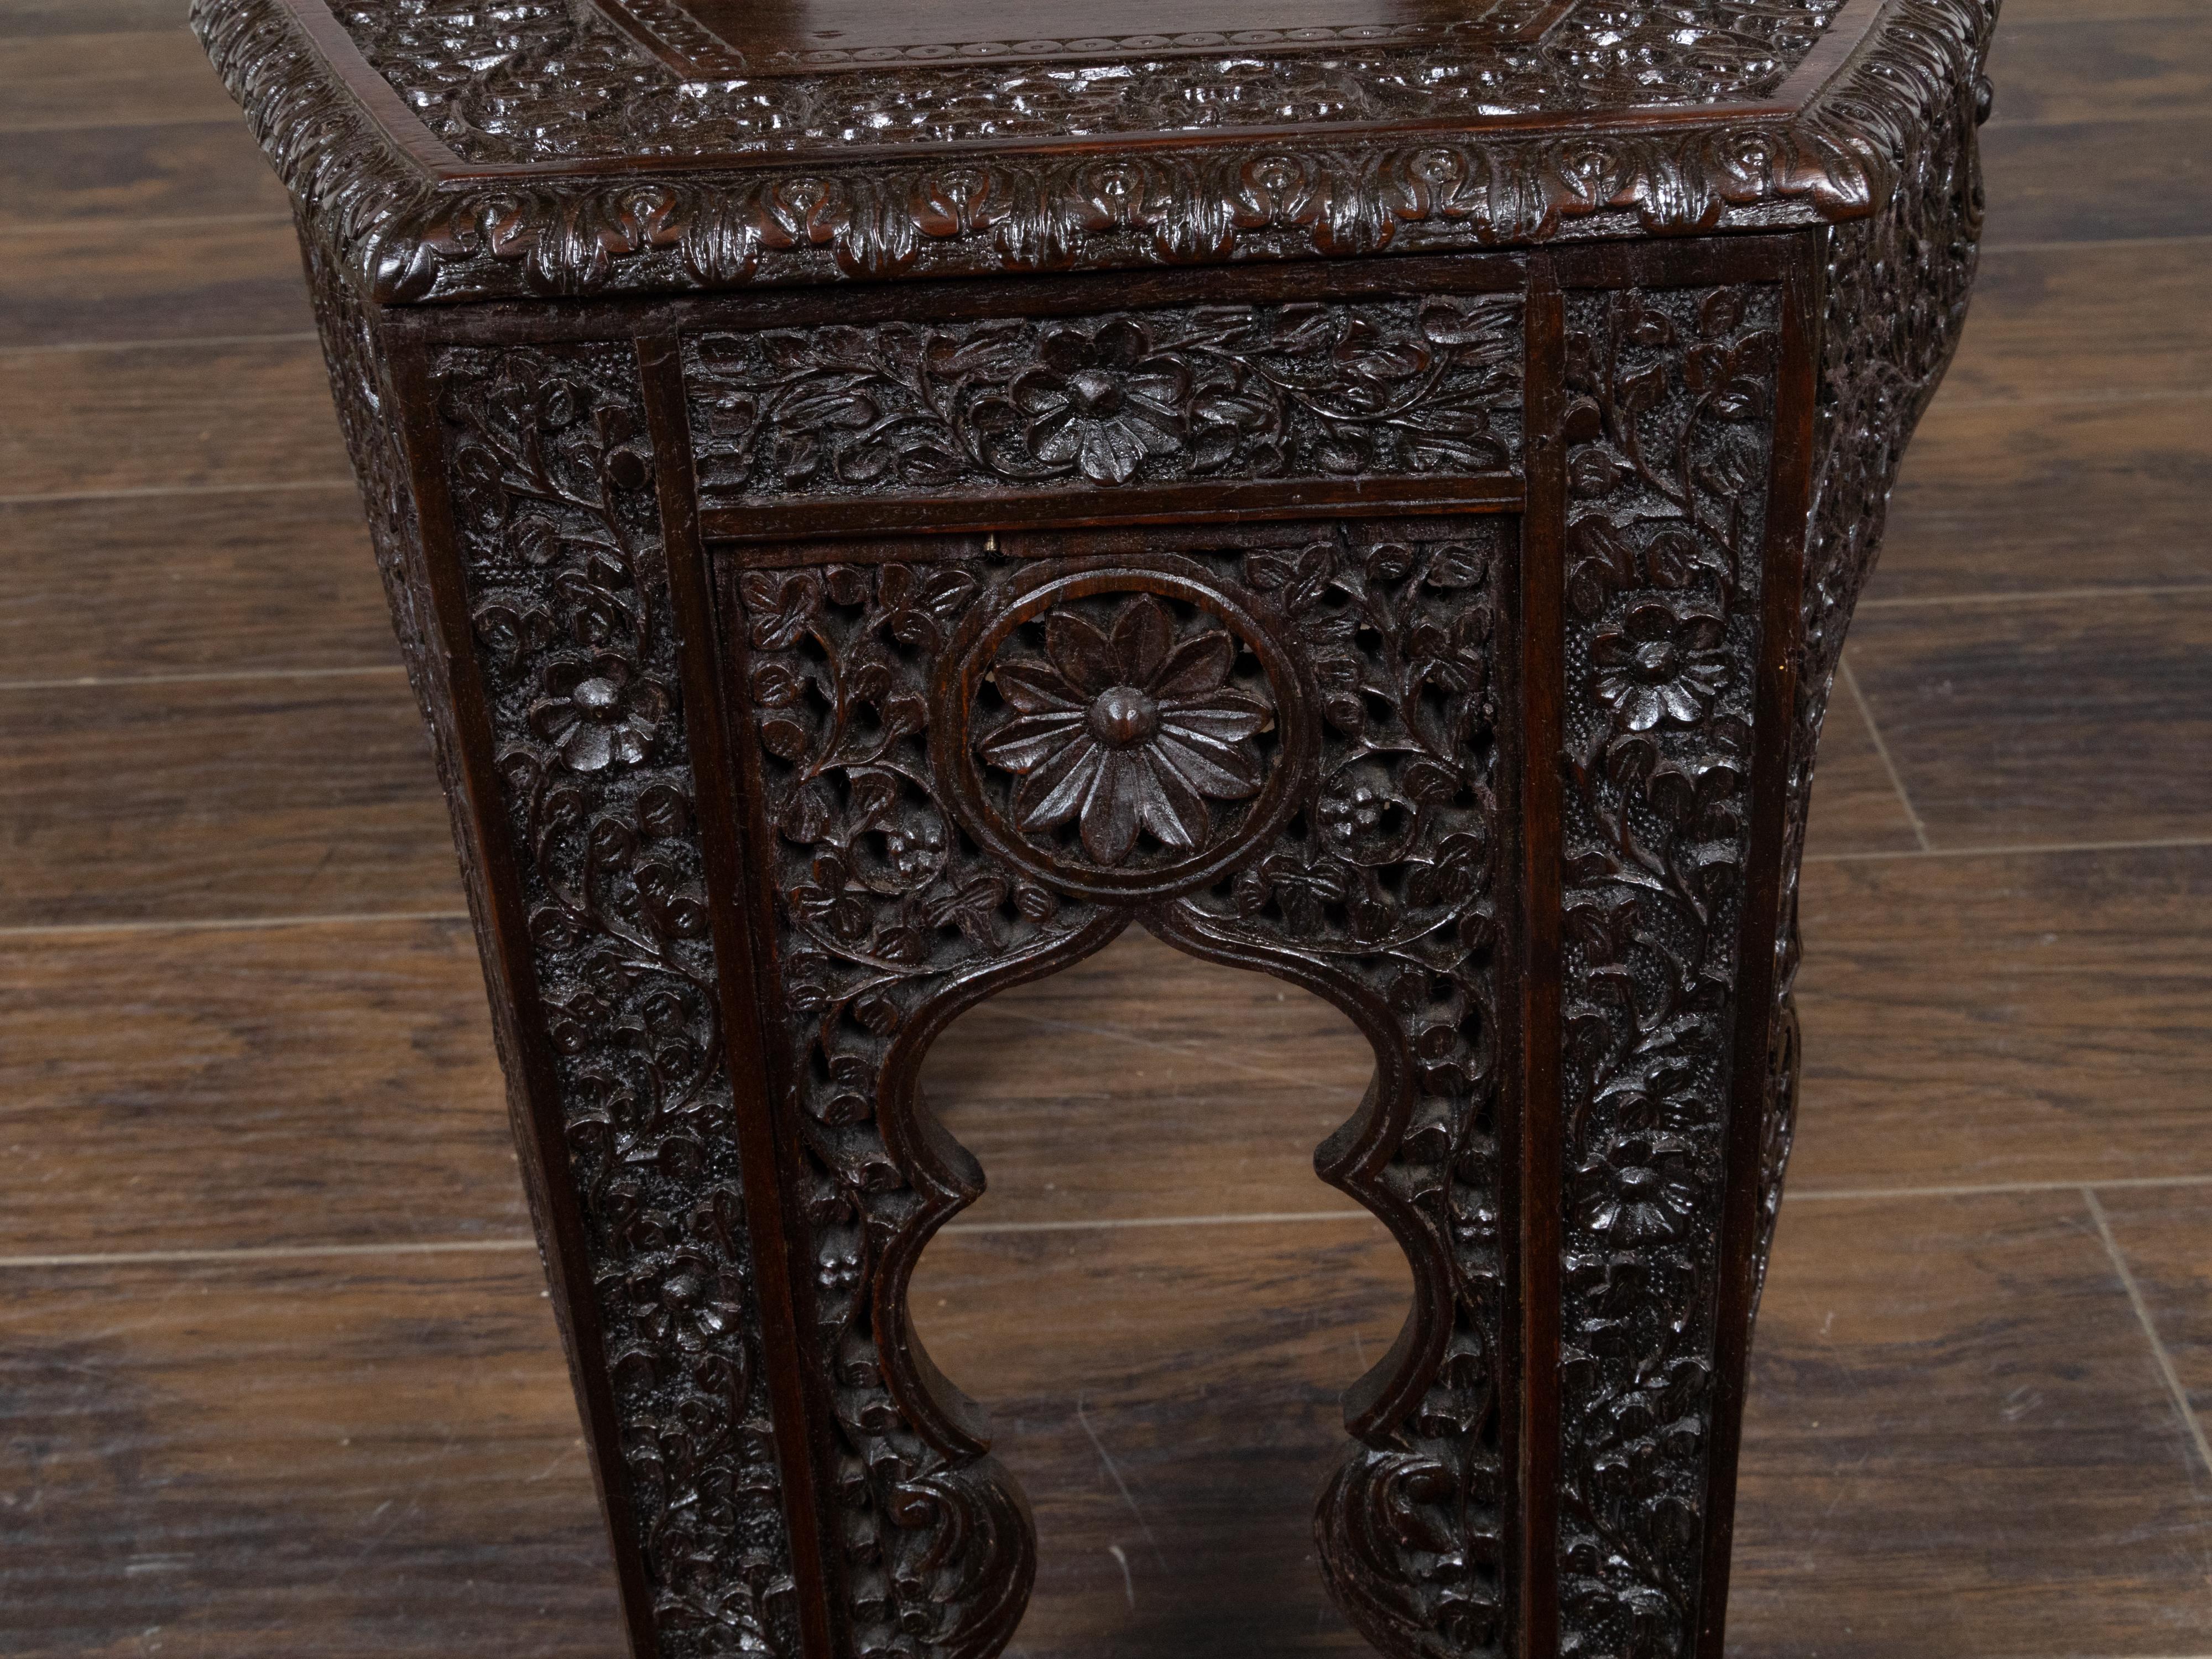 Anglo Indian Hand Carved Side Chair with Richly Carved Floral Motifs, circa 1900 For Sale 2